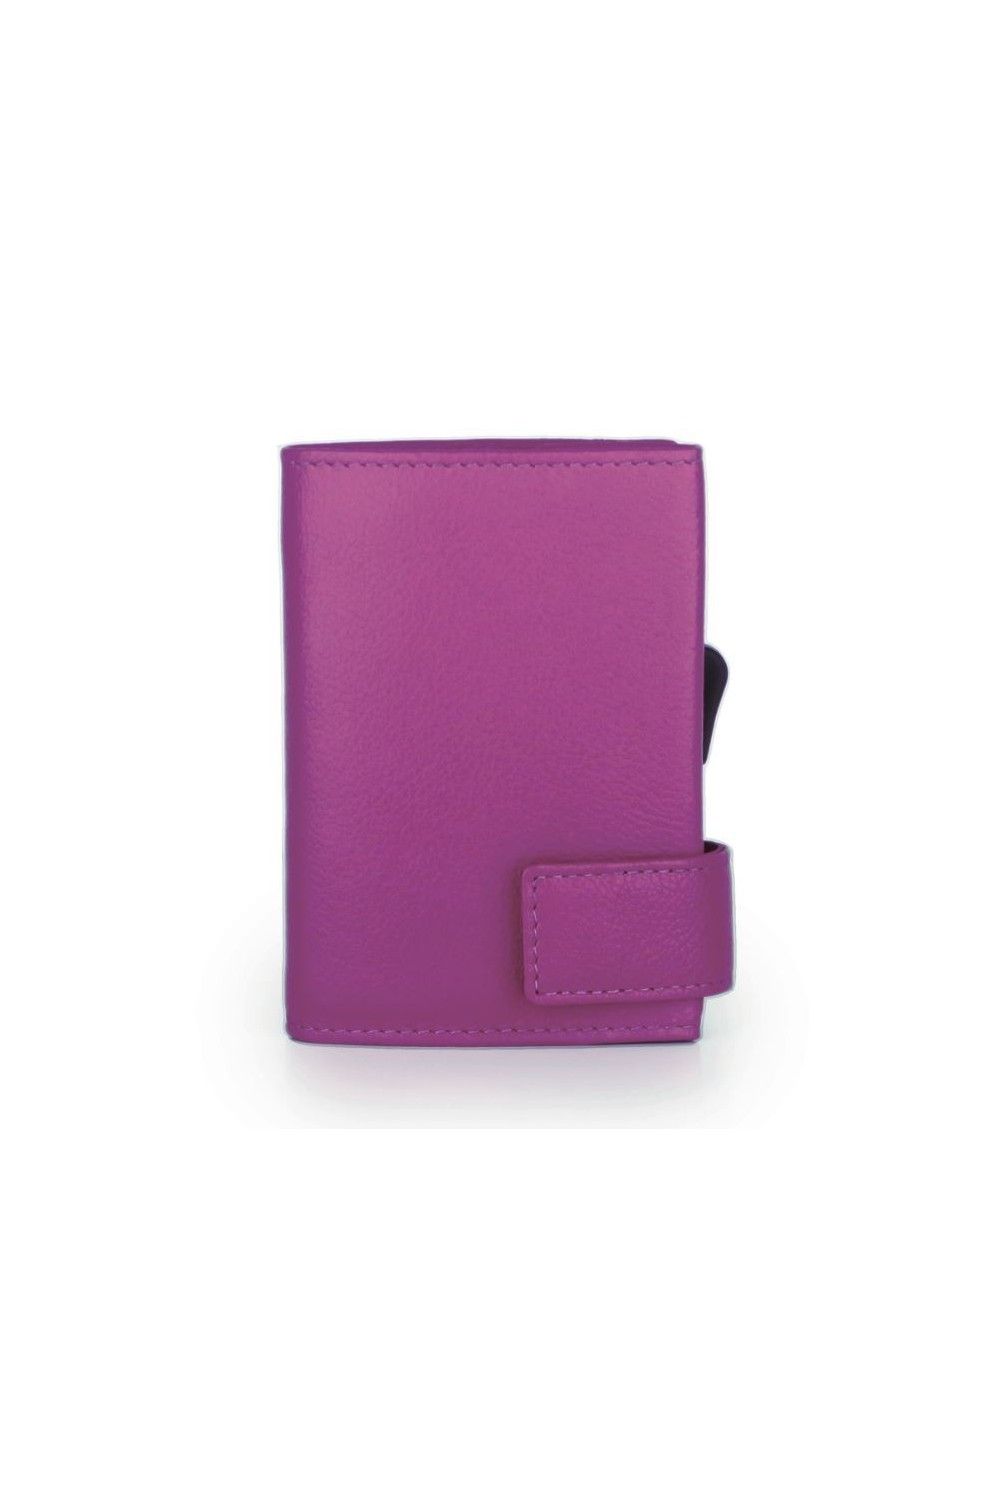 SecWal Card Case RV Leather Pink